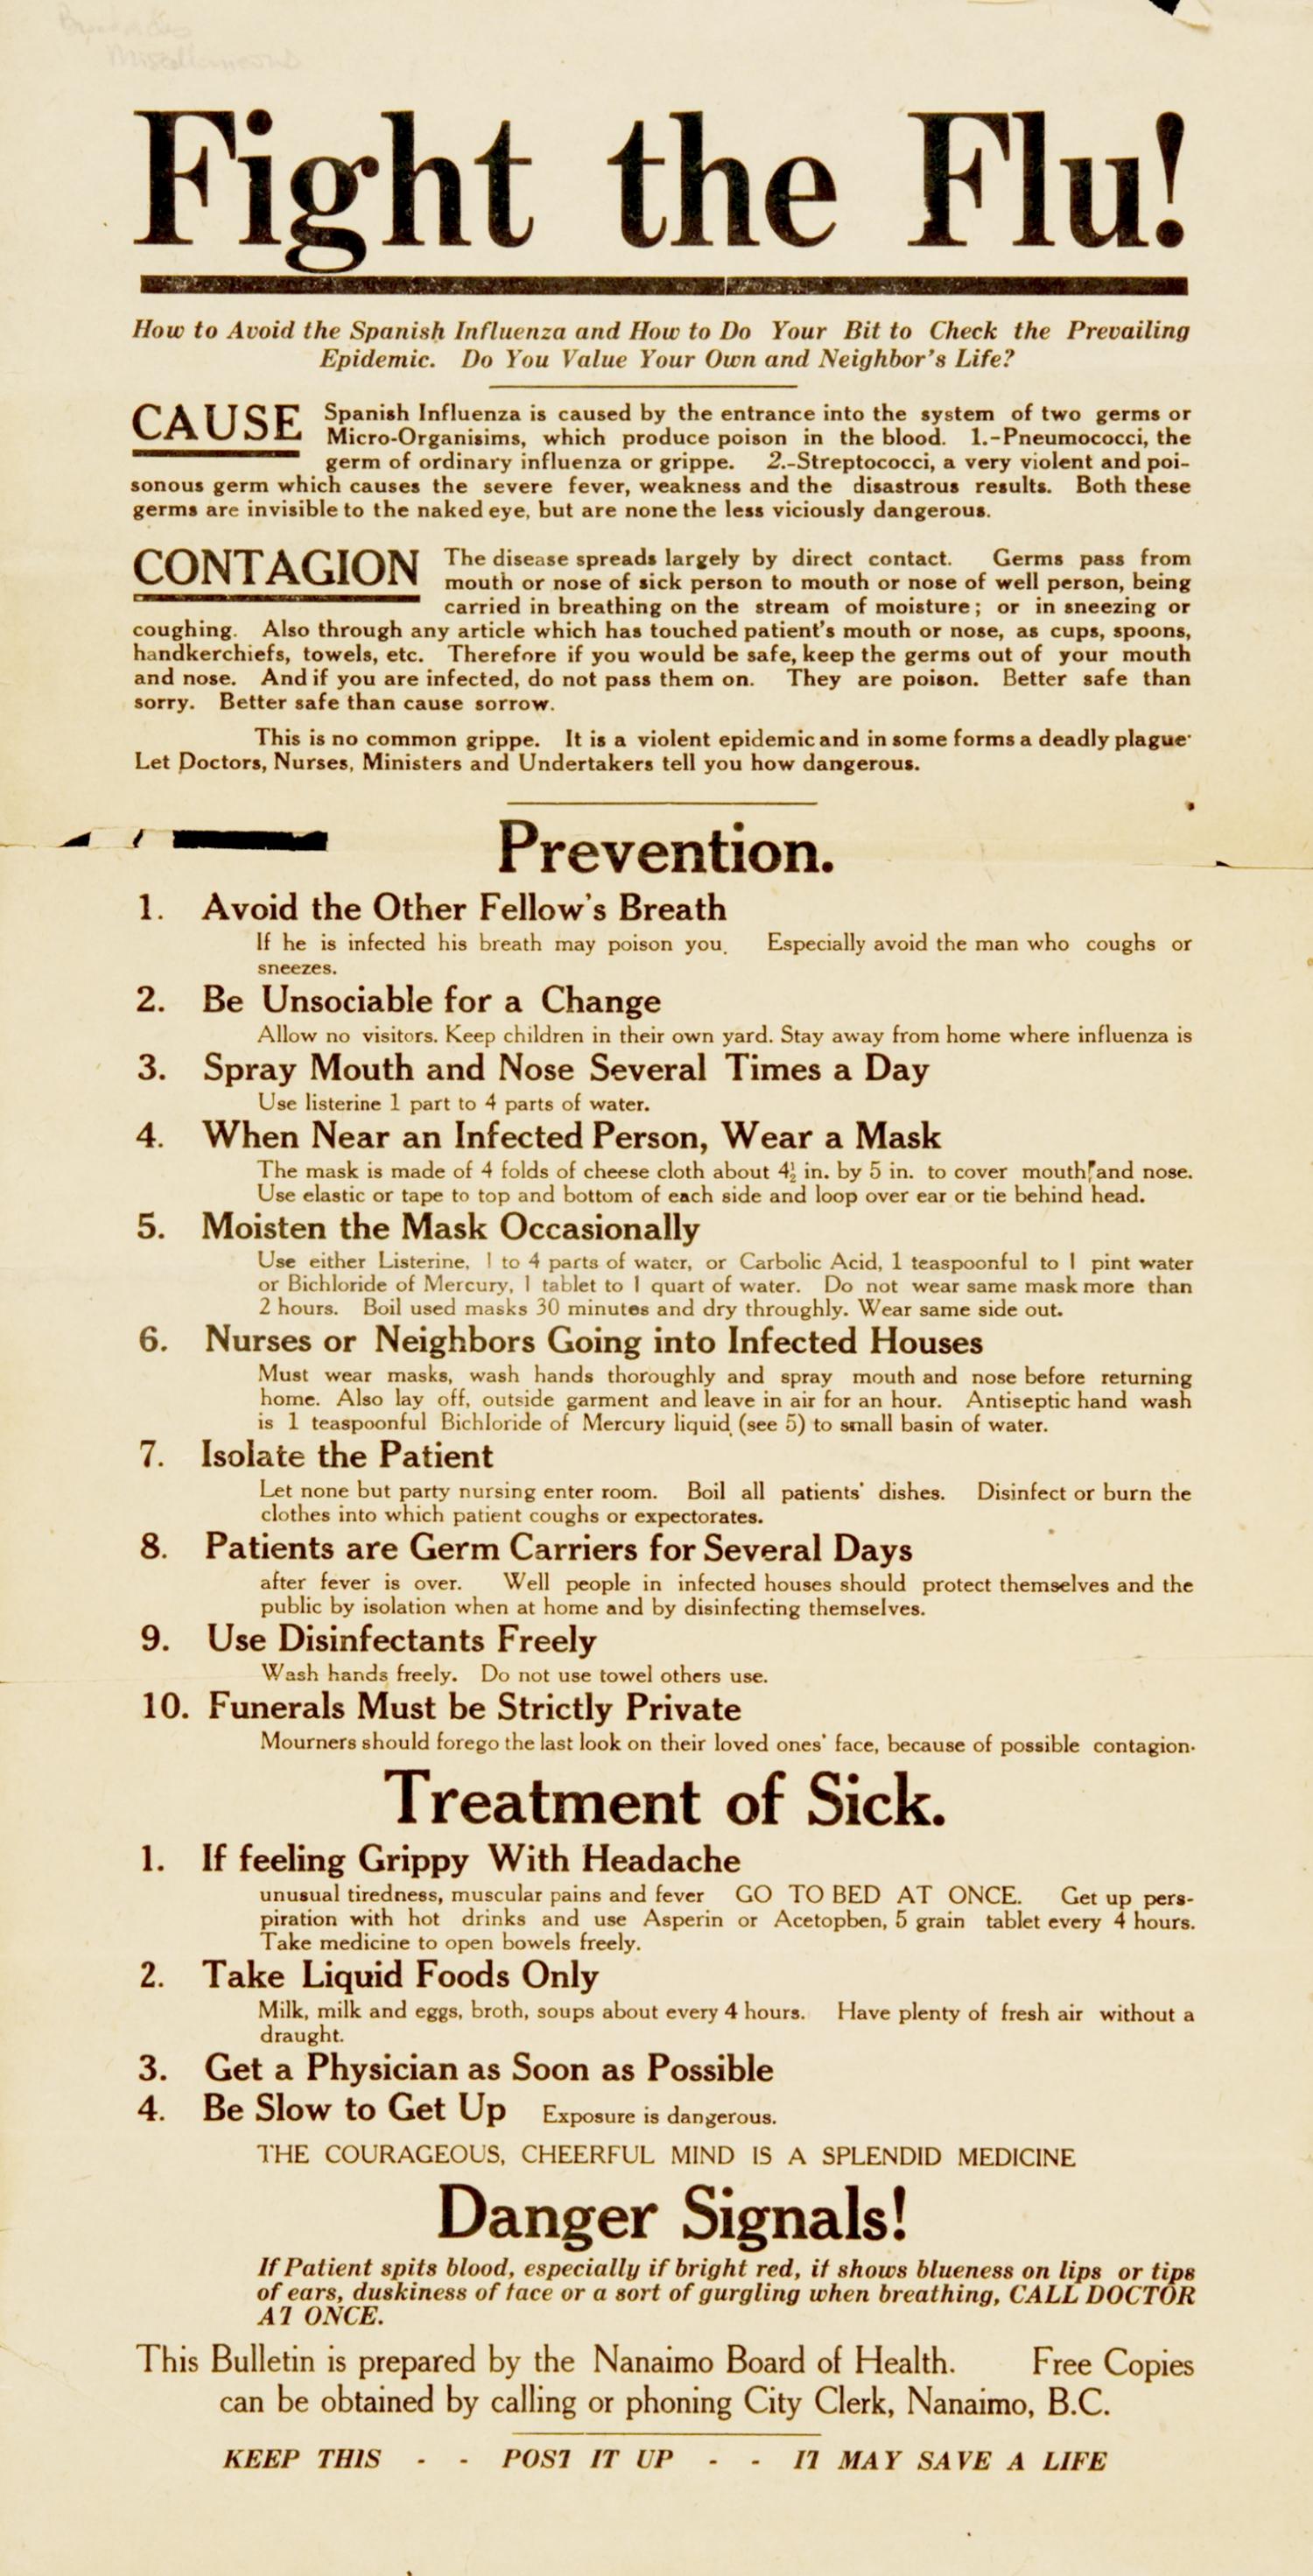 Pamphlet about the Spanish Influenza. It reads: “Fight the flu! How to avoid the Spanish influenza and how to do your bit to check the prevailing epidemic. Do you value your own and neighbor's life?”